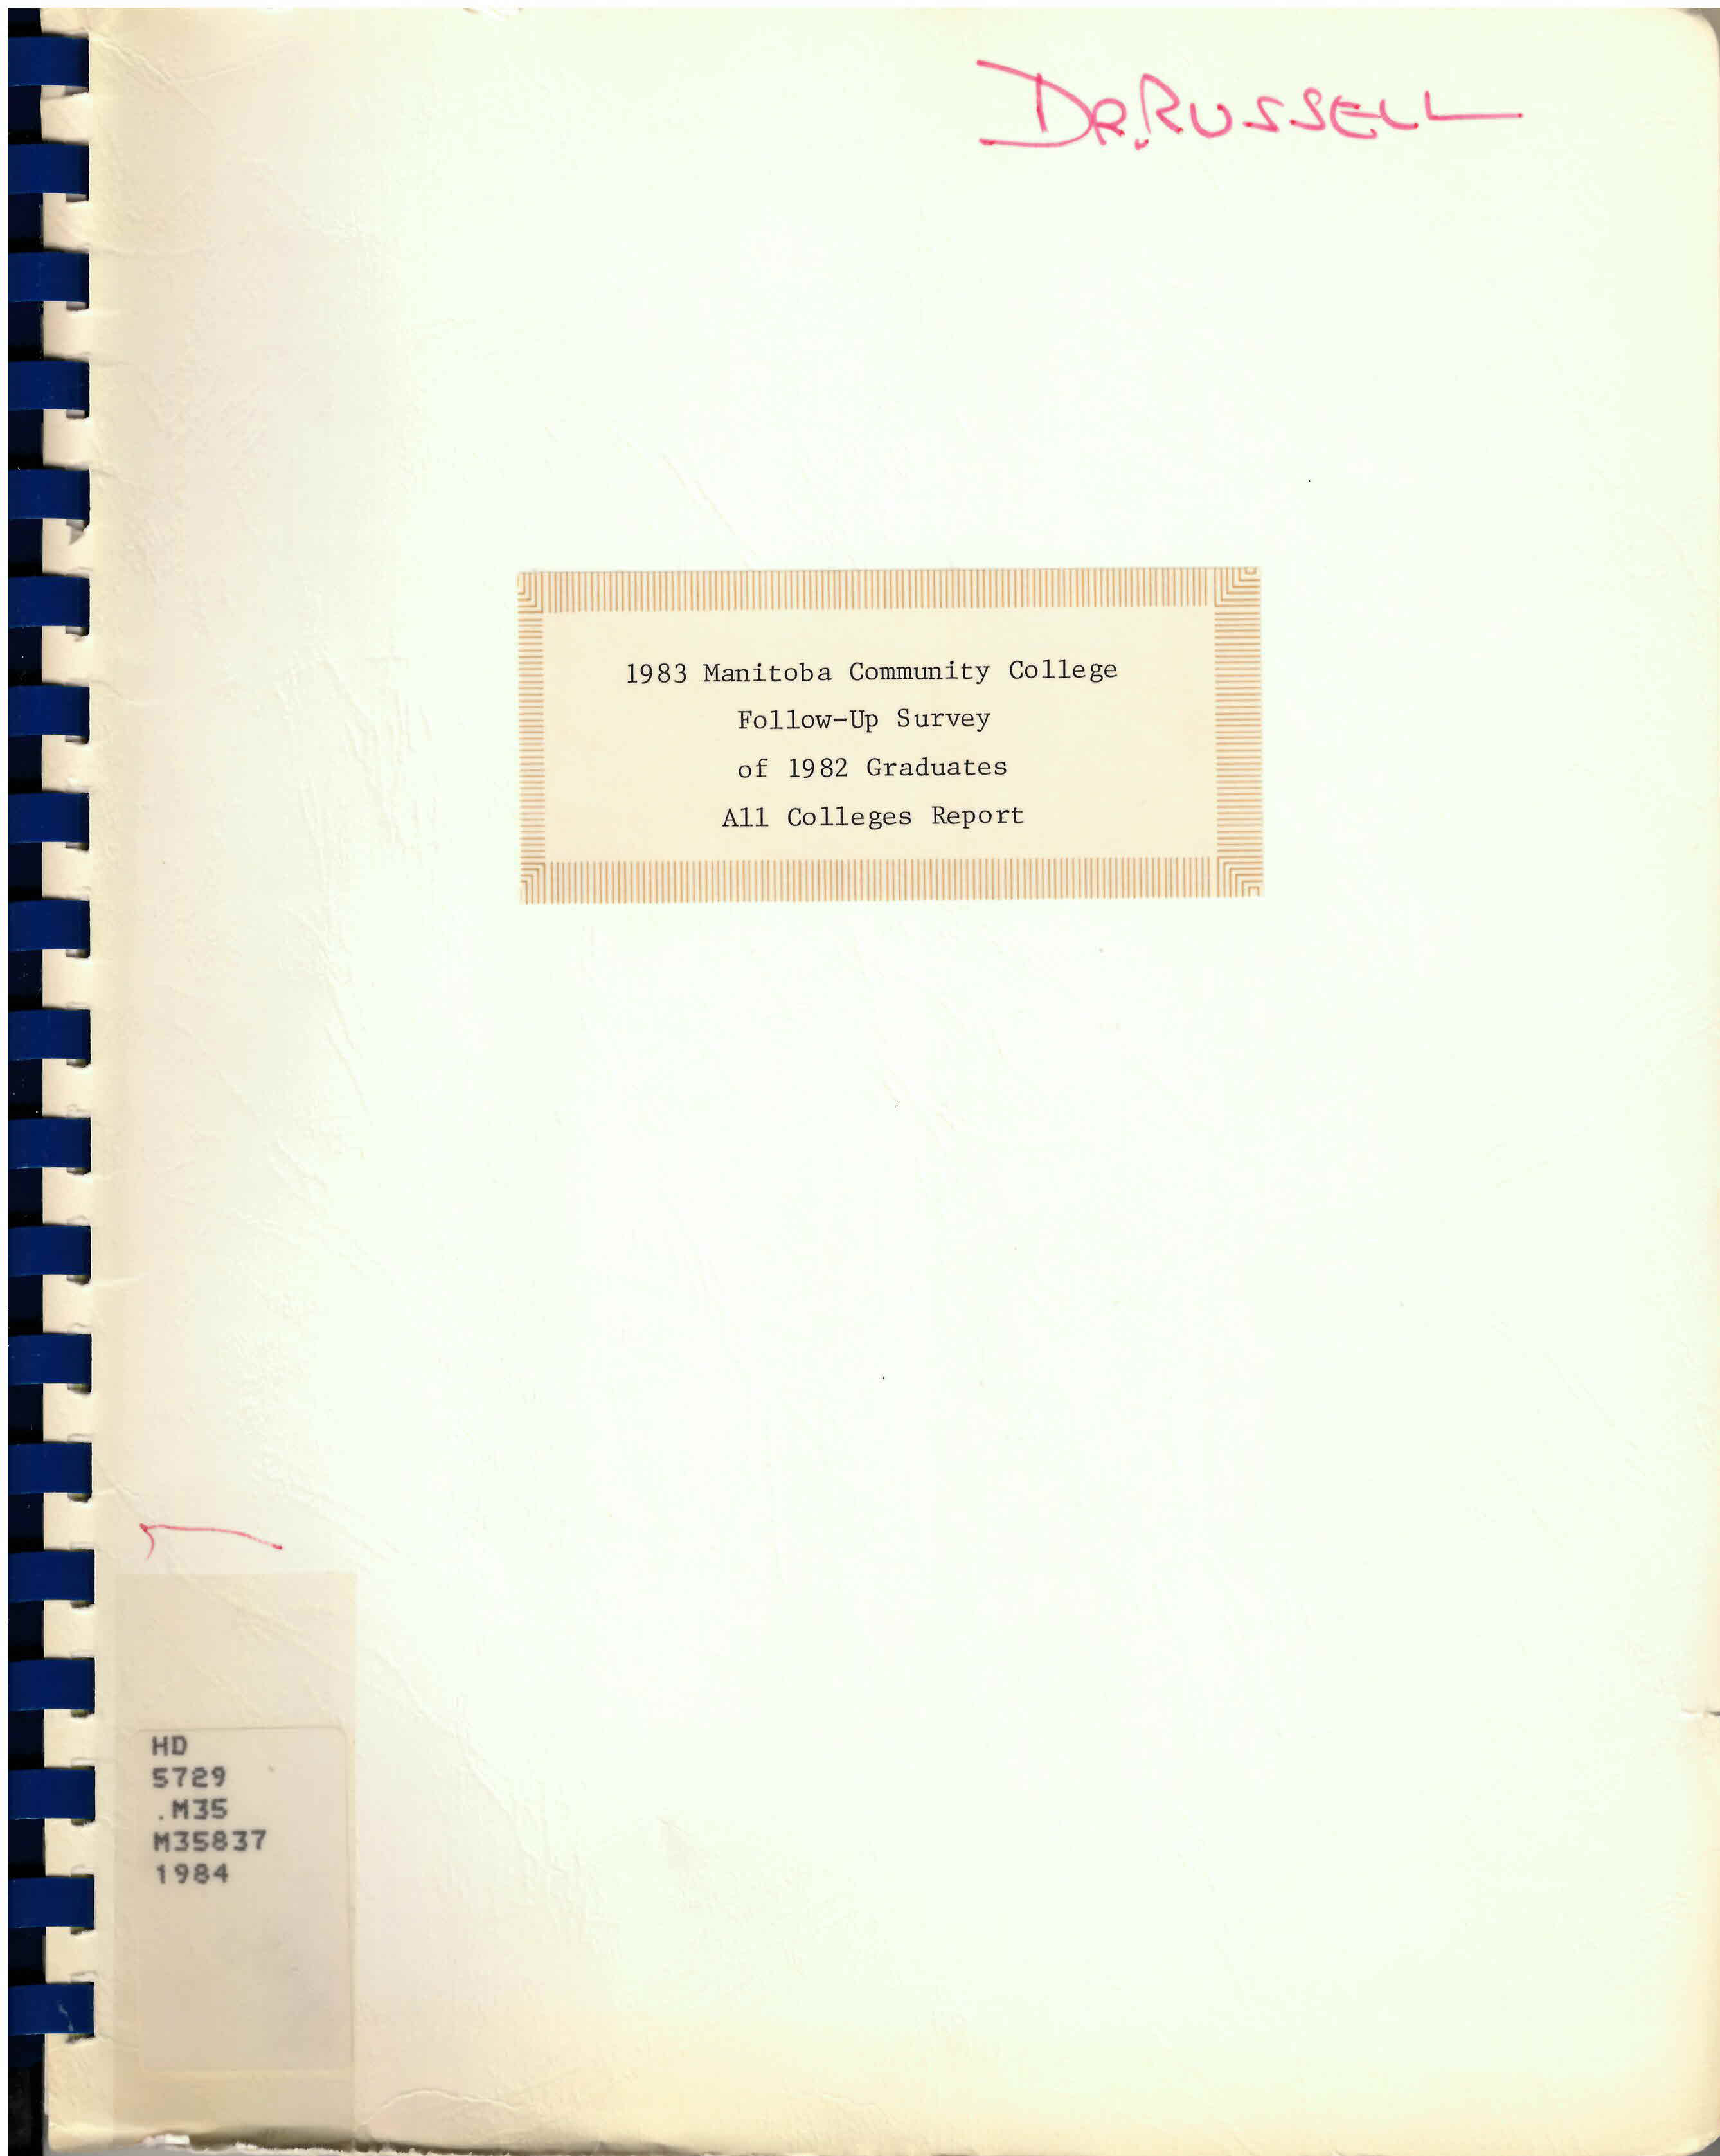 1983 Manitoba community college follow-up survey of 1982  graduates, all colleges report